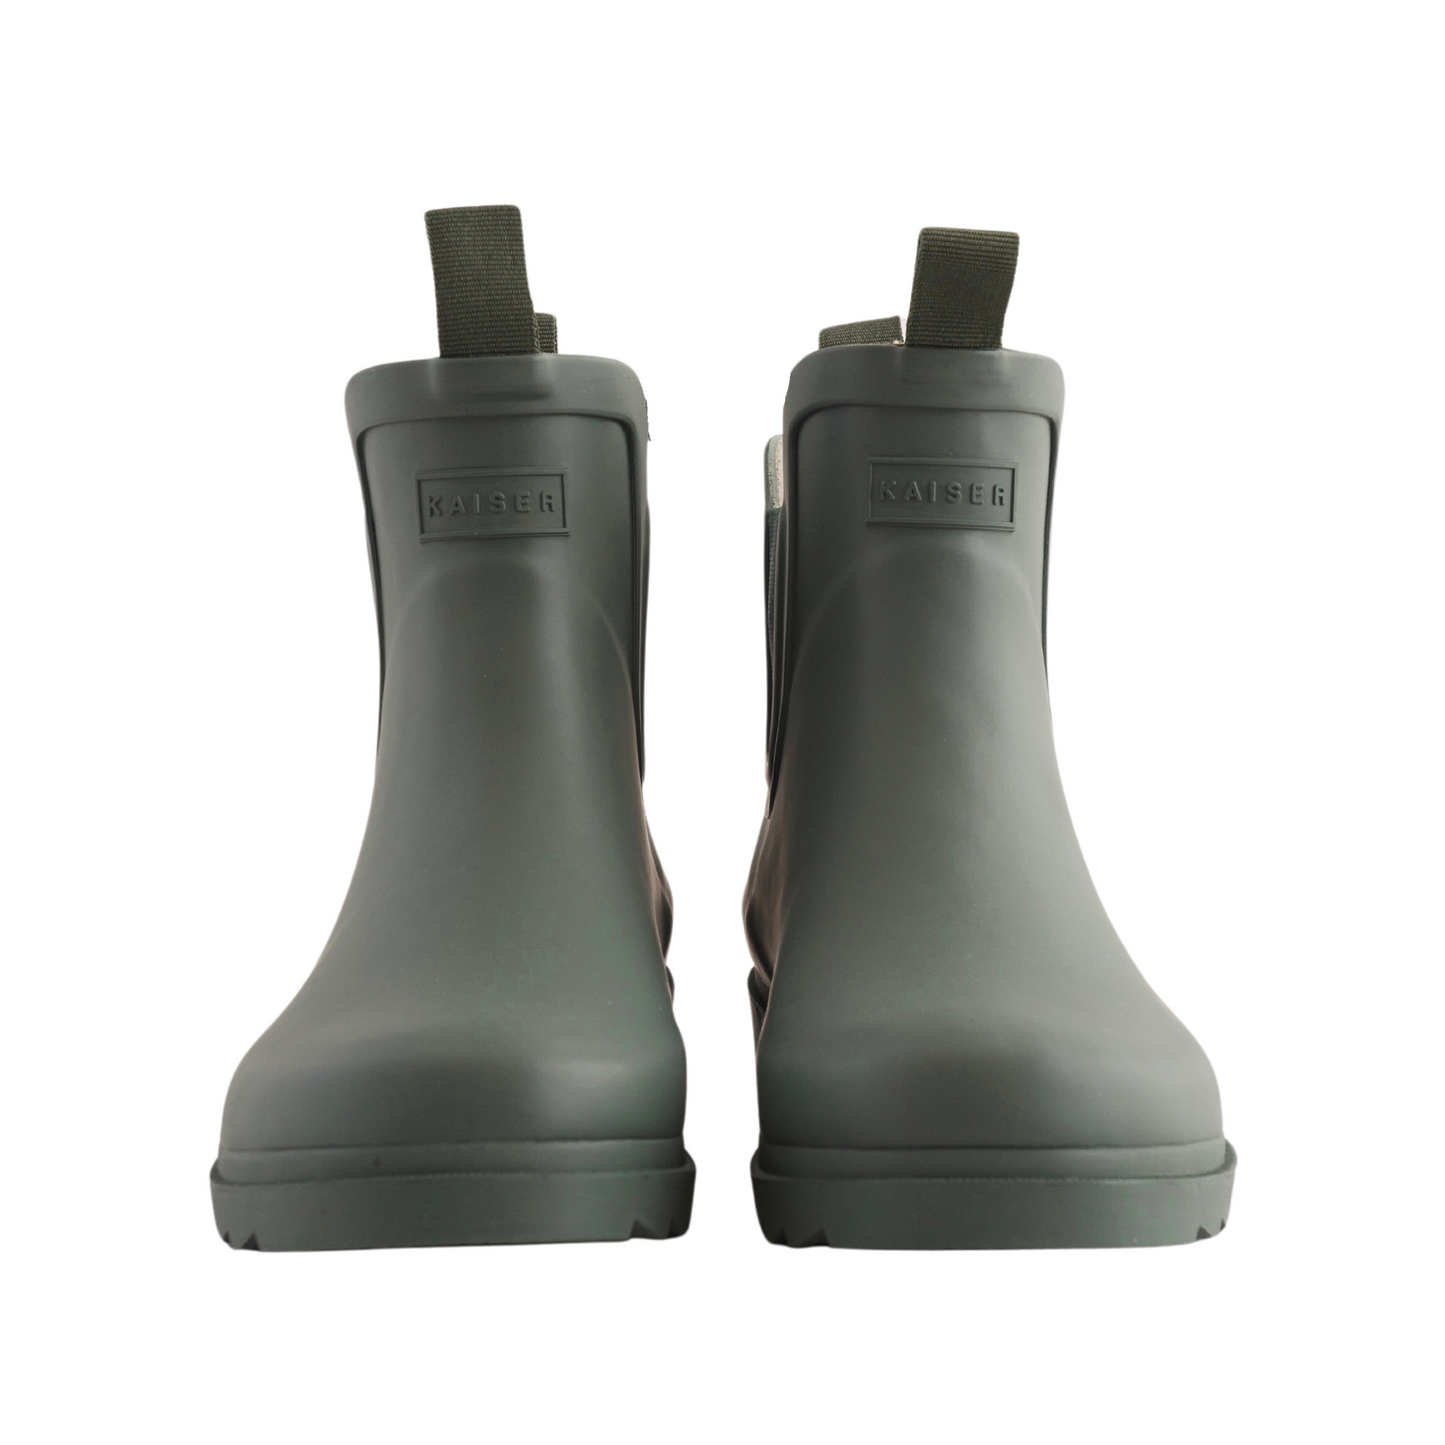 Ankle Gumboots - Green Size 8